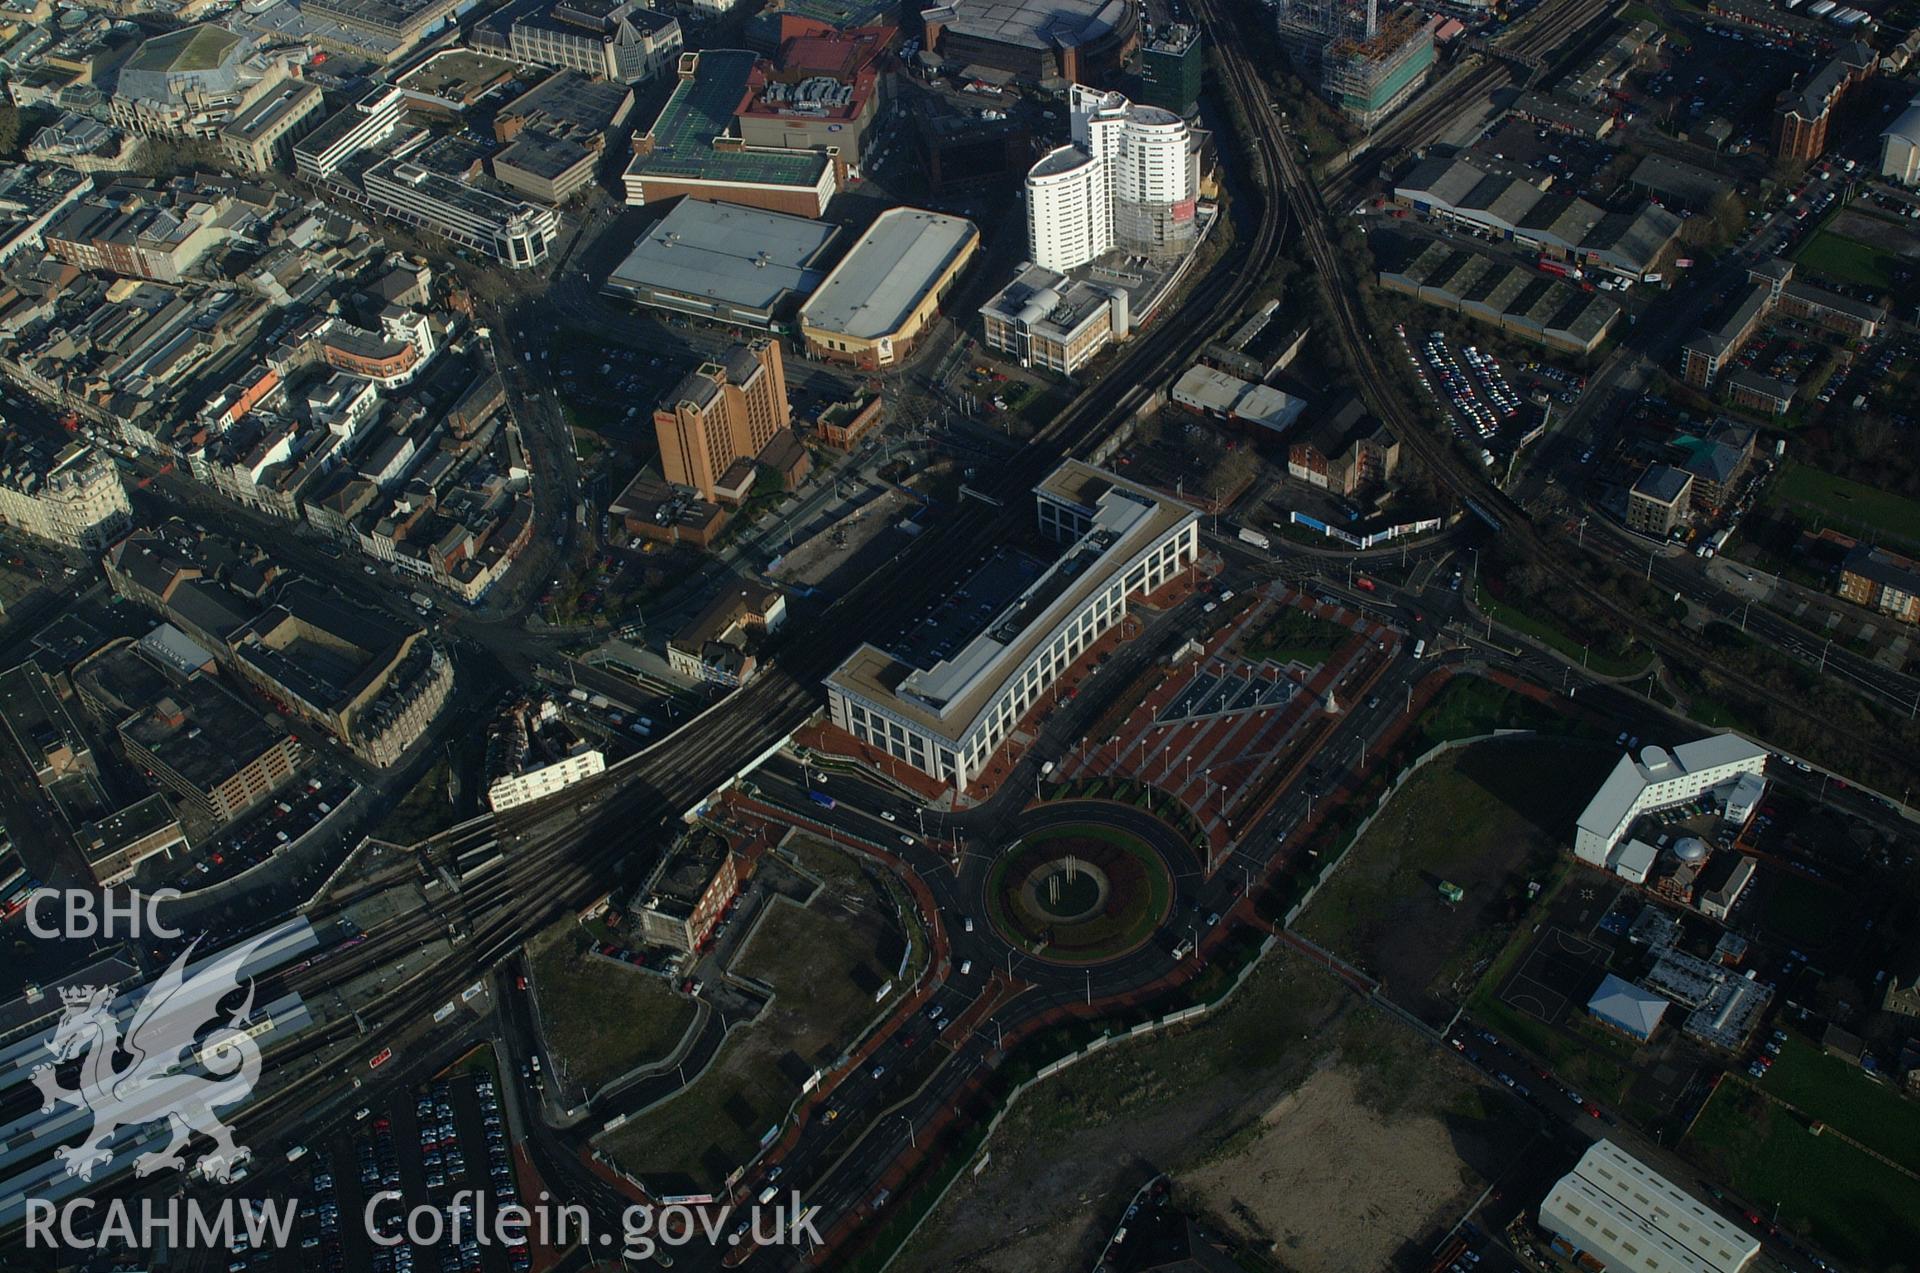 RCAHMW colour oblique aerial photograph of Cardiff taken on 13/01/2005 by Toby Driver